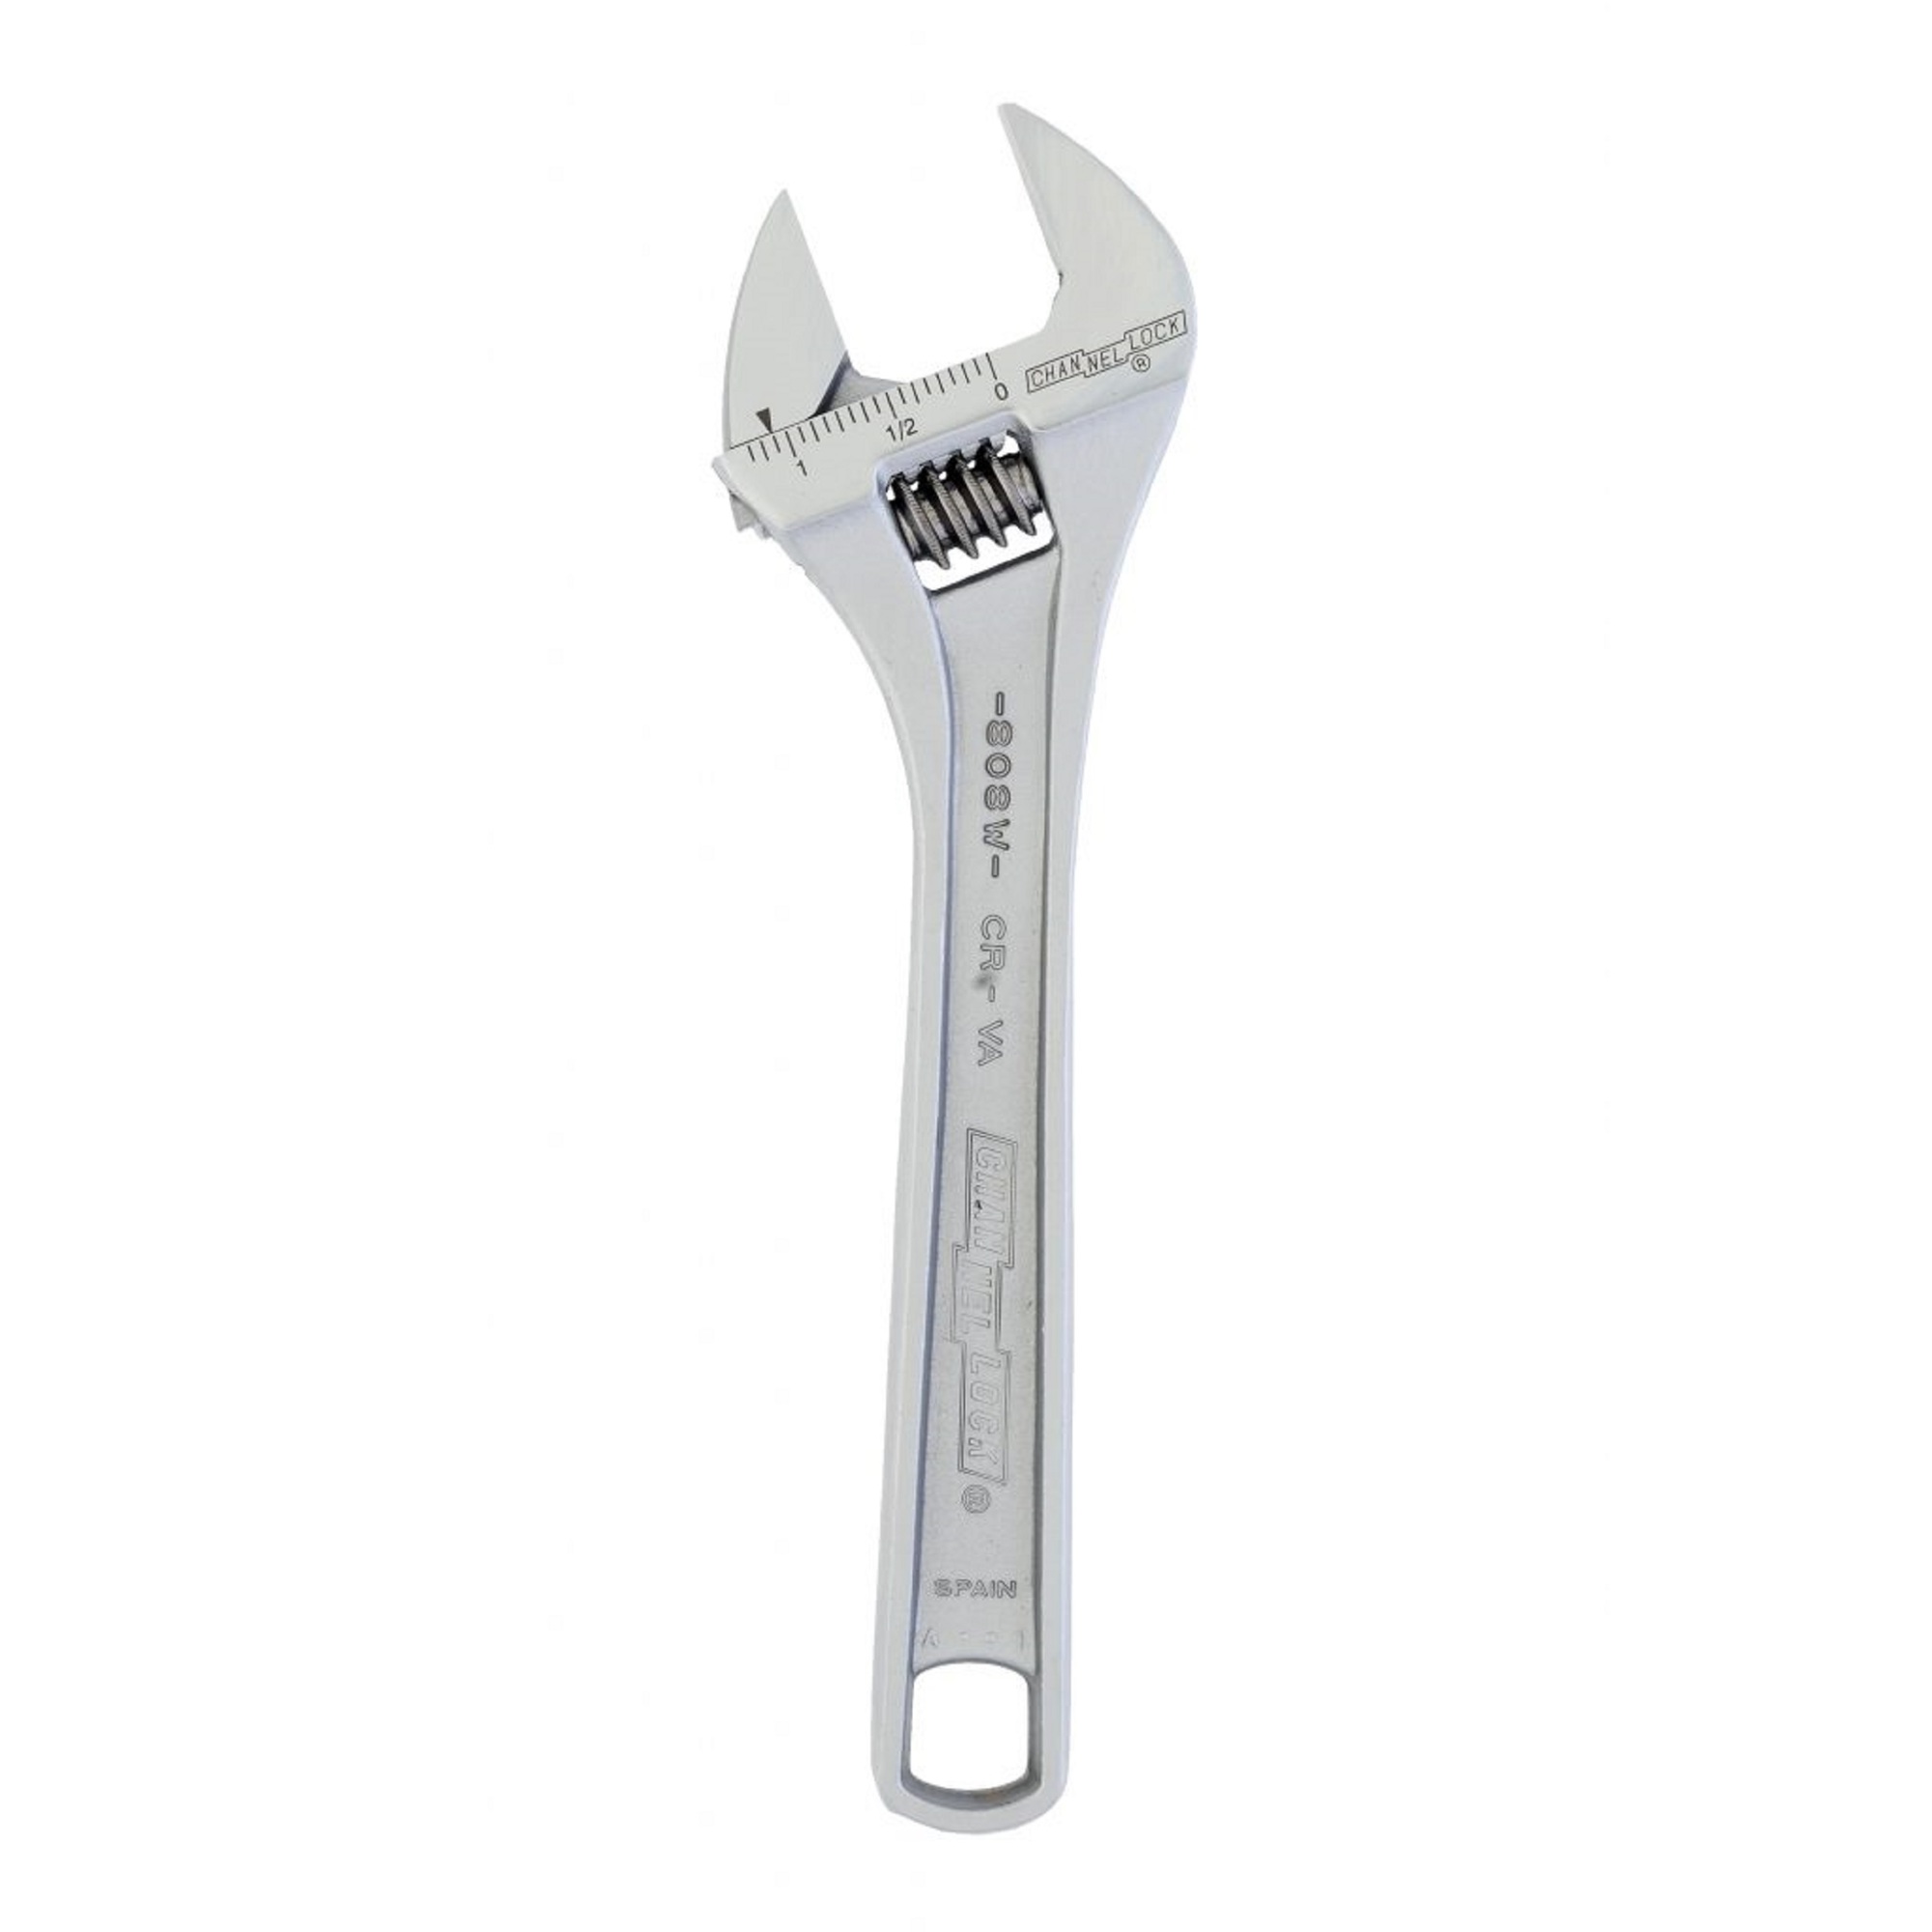 8Inch Chrome/Nickel Finish Steel Adjustable Wrench, Pieces (qty.) 1, Tool Length 8 in, Measurement Standard Standard (SAE), Model - Channellock 808W